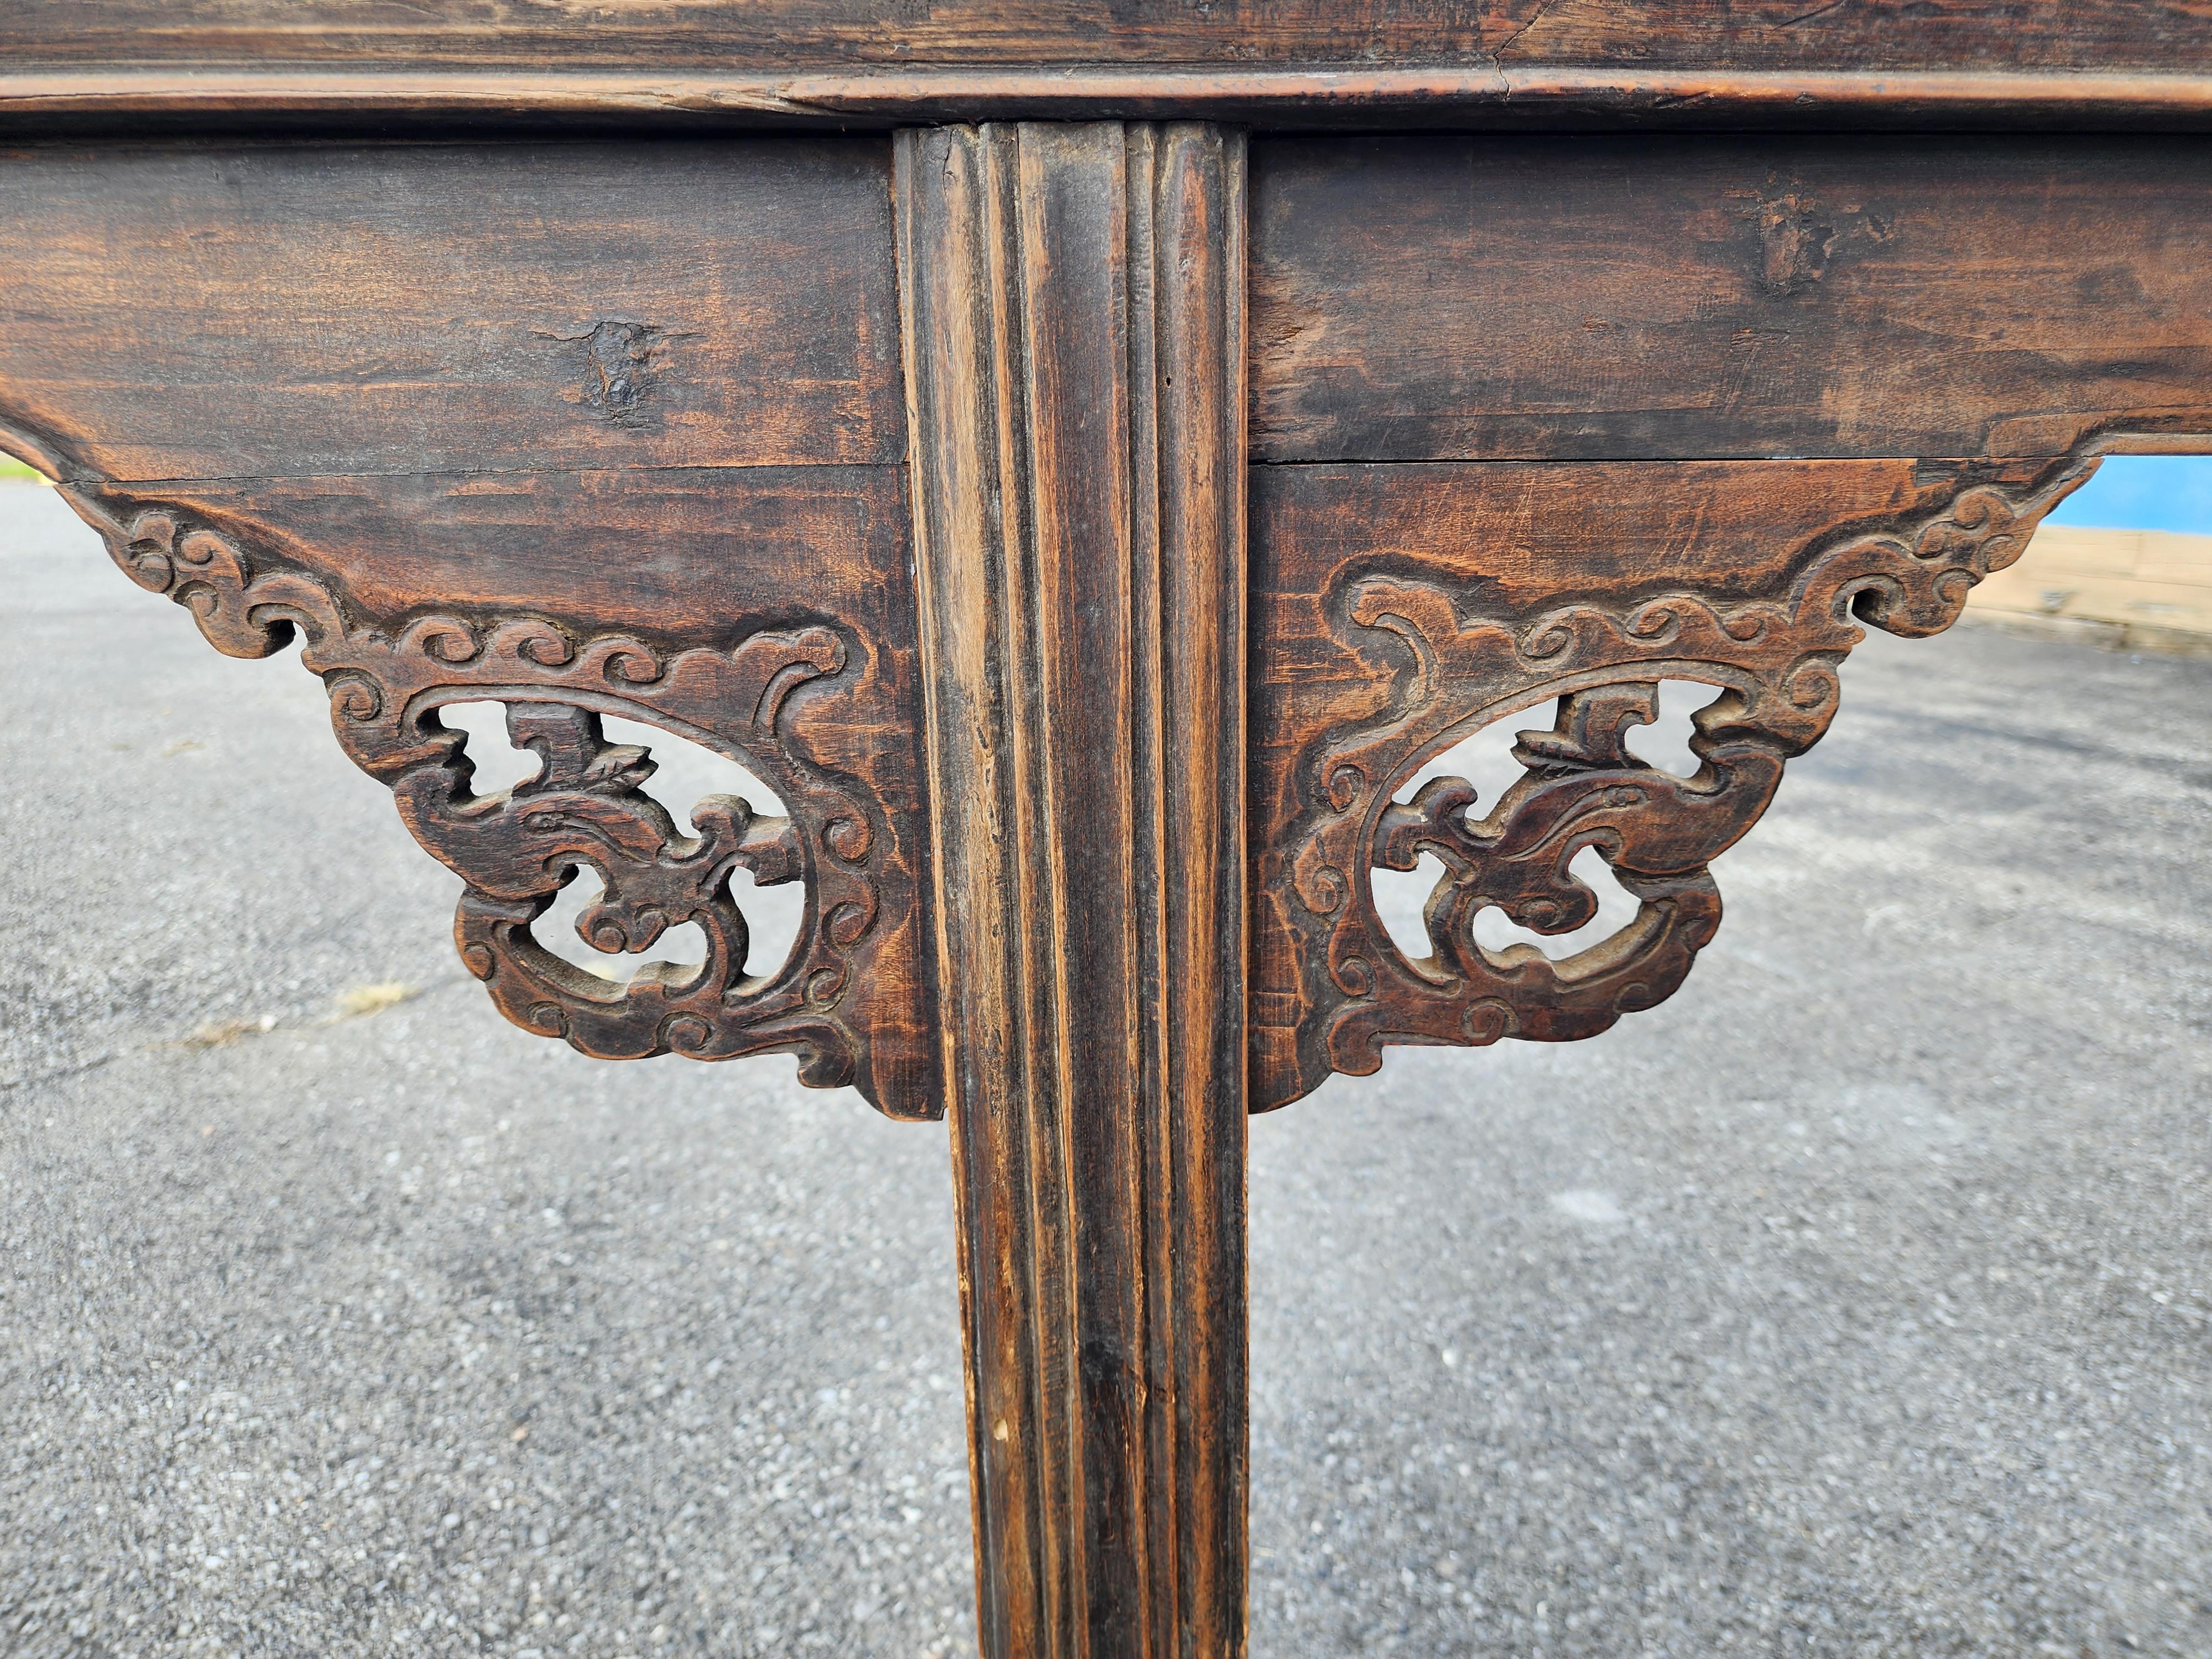 Qing Dynasty Chinese Altar Table For Sale 2